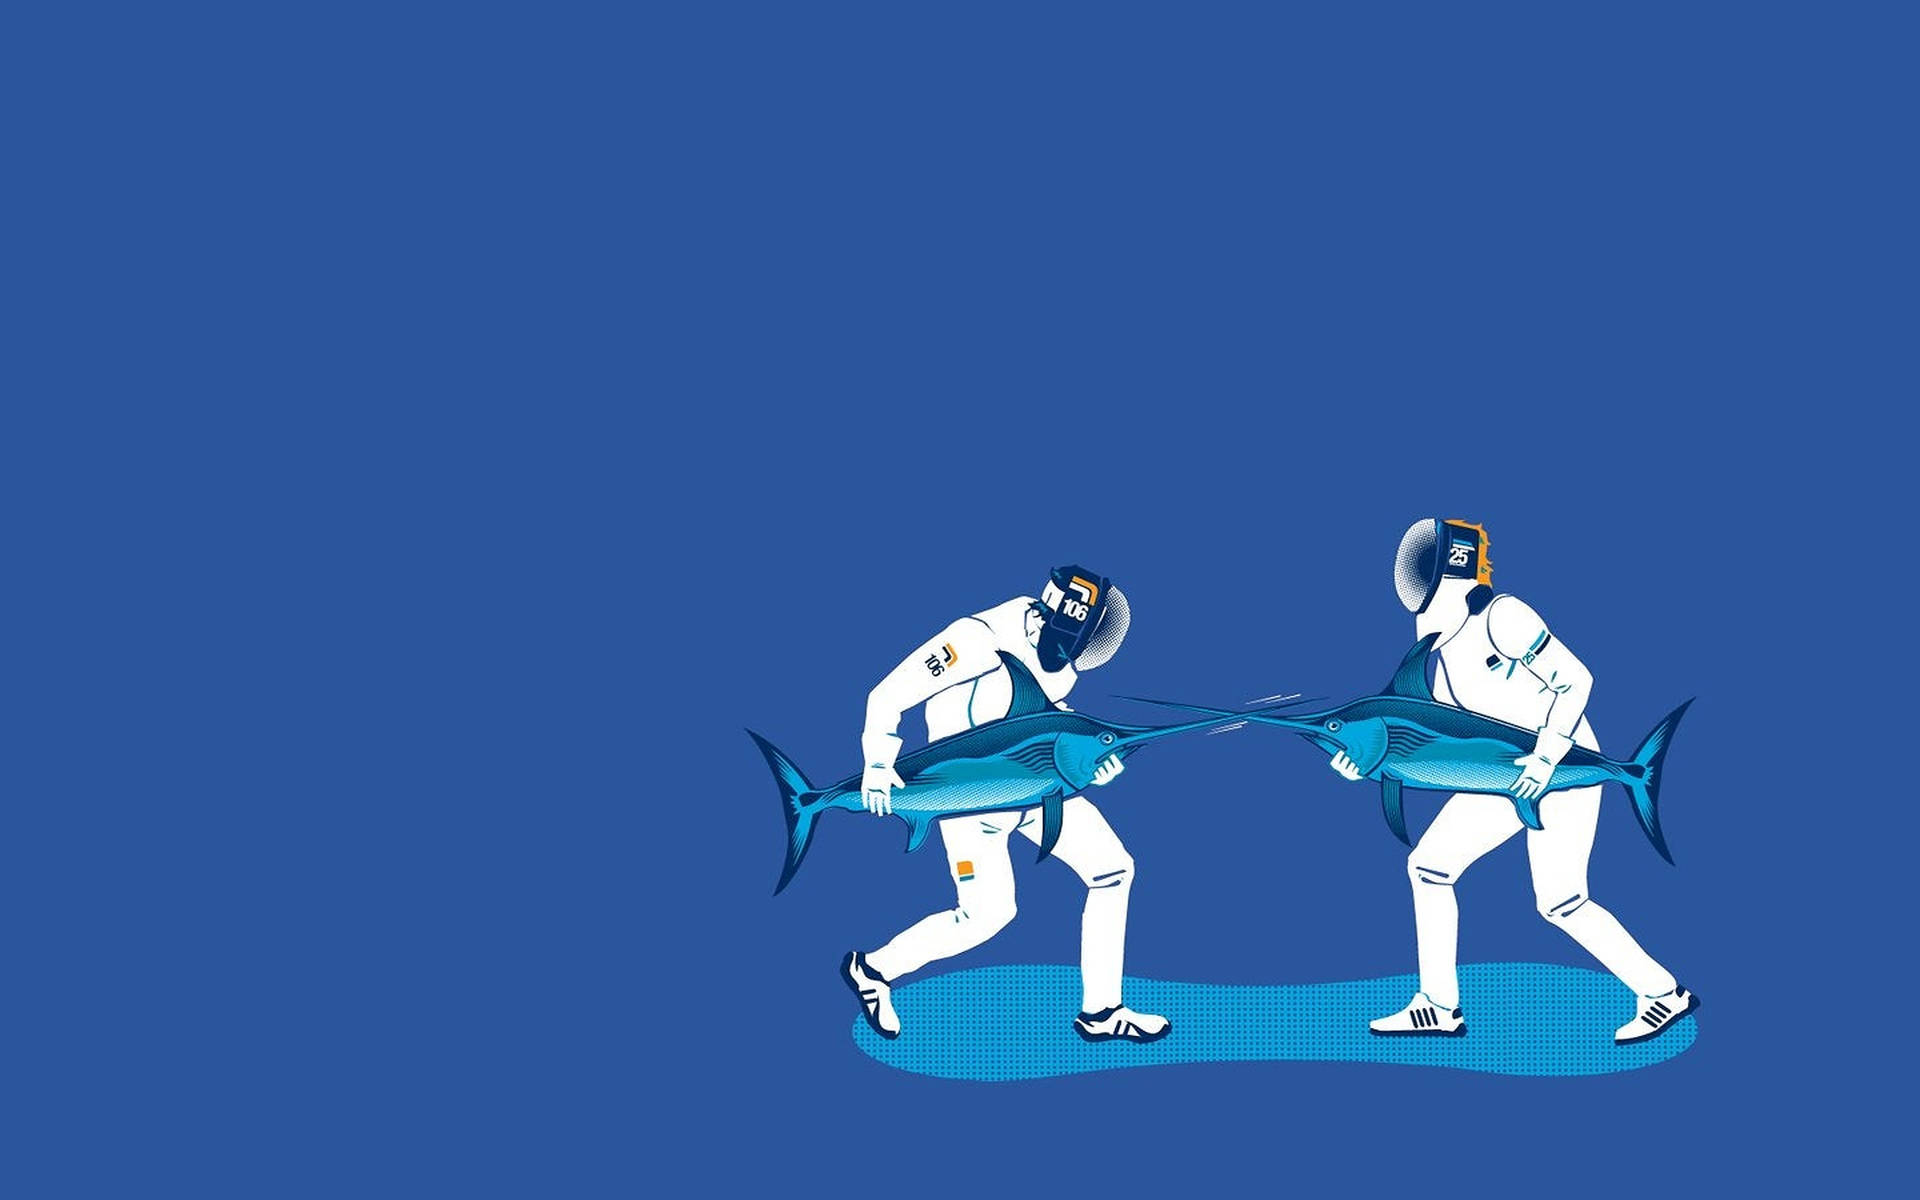 An exhilarating moment in a fencing match Wallpaper